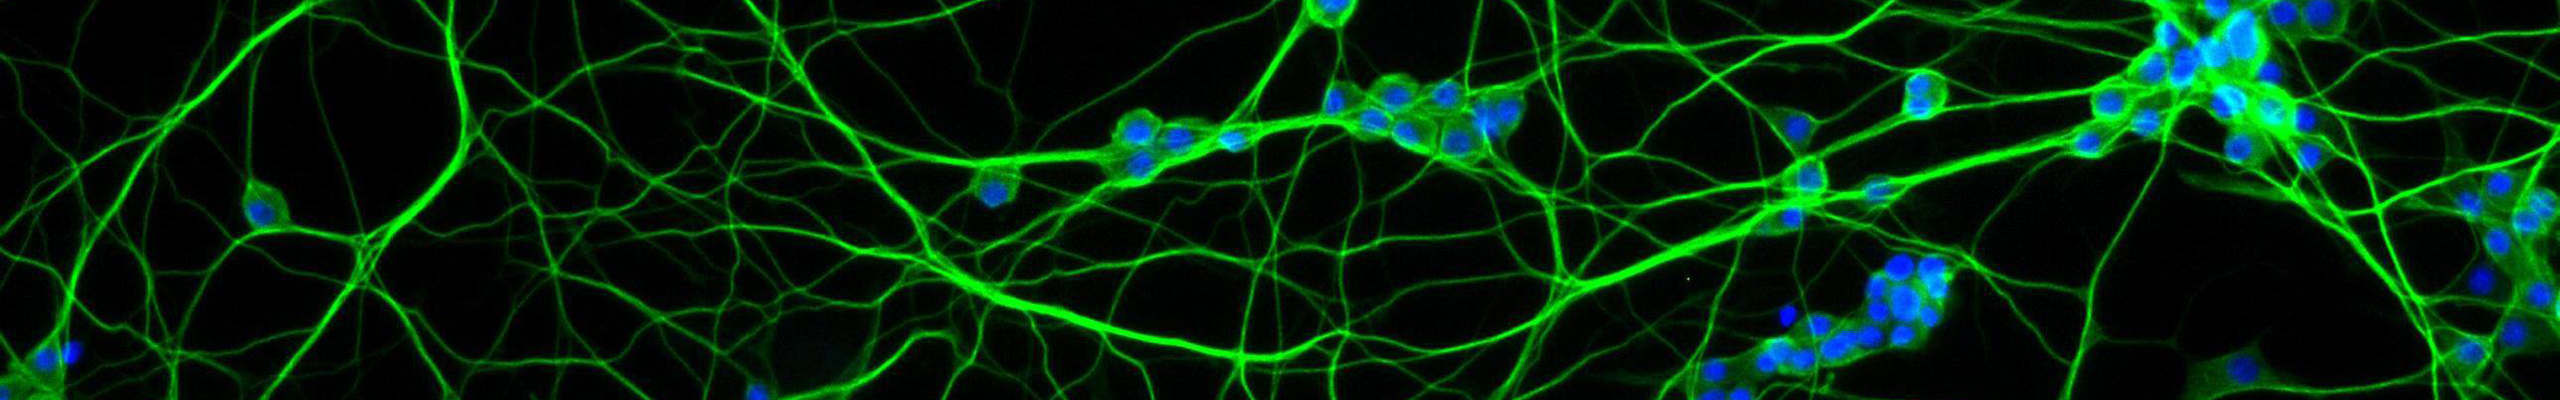 neural engineering research image from Jennifer West lab